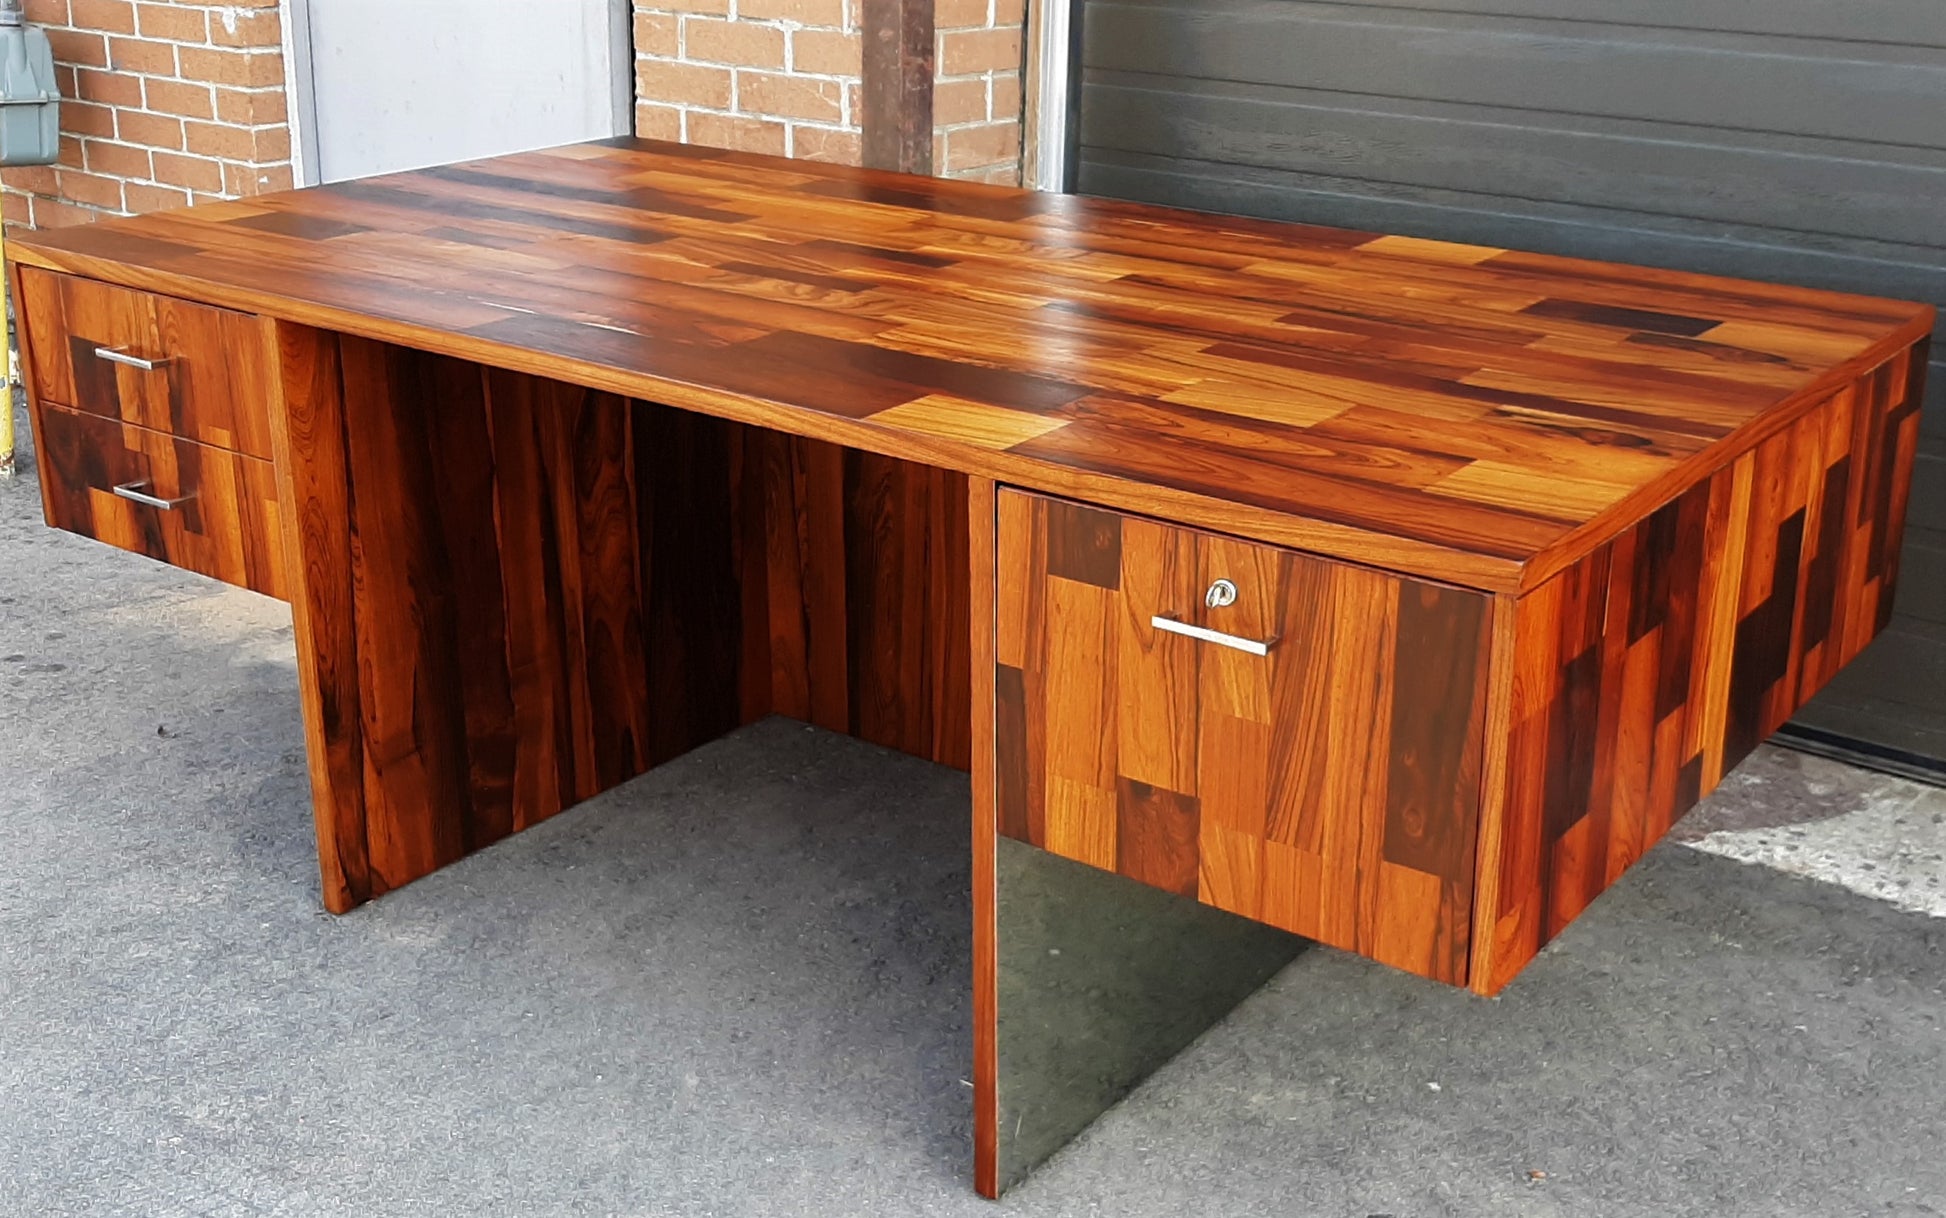 The Cocobolo Desk Experience – A Buyer’s Guide